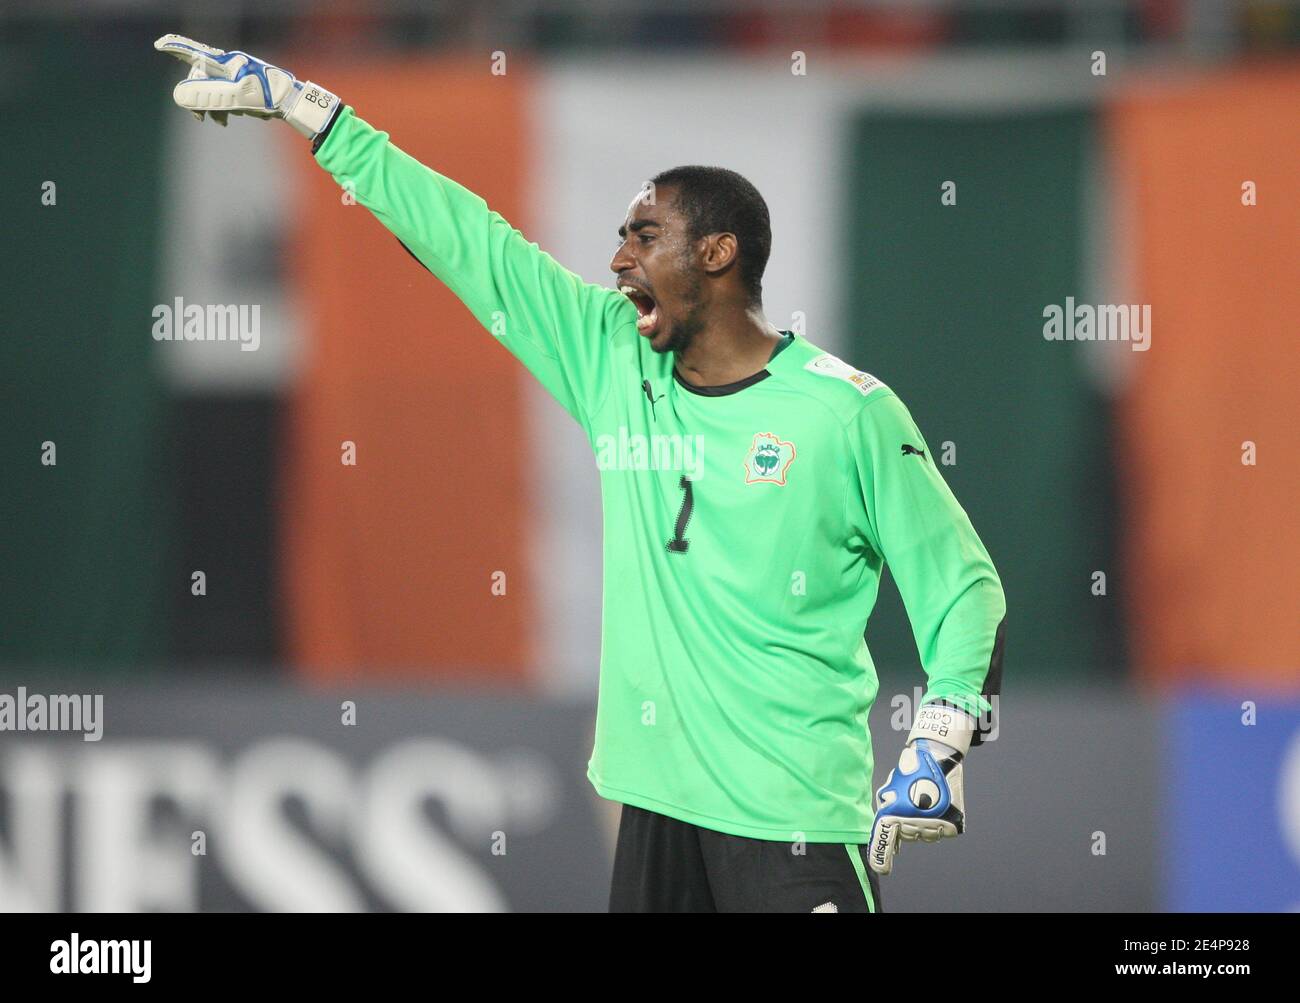 Ivory Coast's goalkeeper Barry Boubacar during the African Cup of Nations soccer match, Ivory Coast vs Benin in Sekondi, Ghana on January 25, 2008. Ivory Coast defeated Benin 4-1. Photo by Steeve McMay/Cameleon/ABACAPRESS.COM Stock Photo